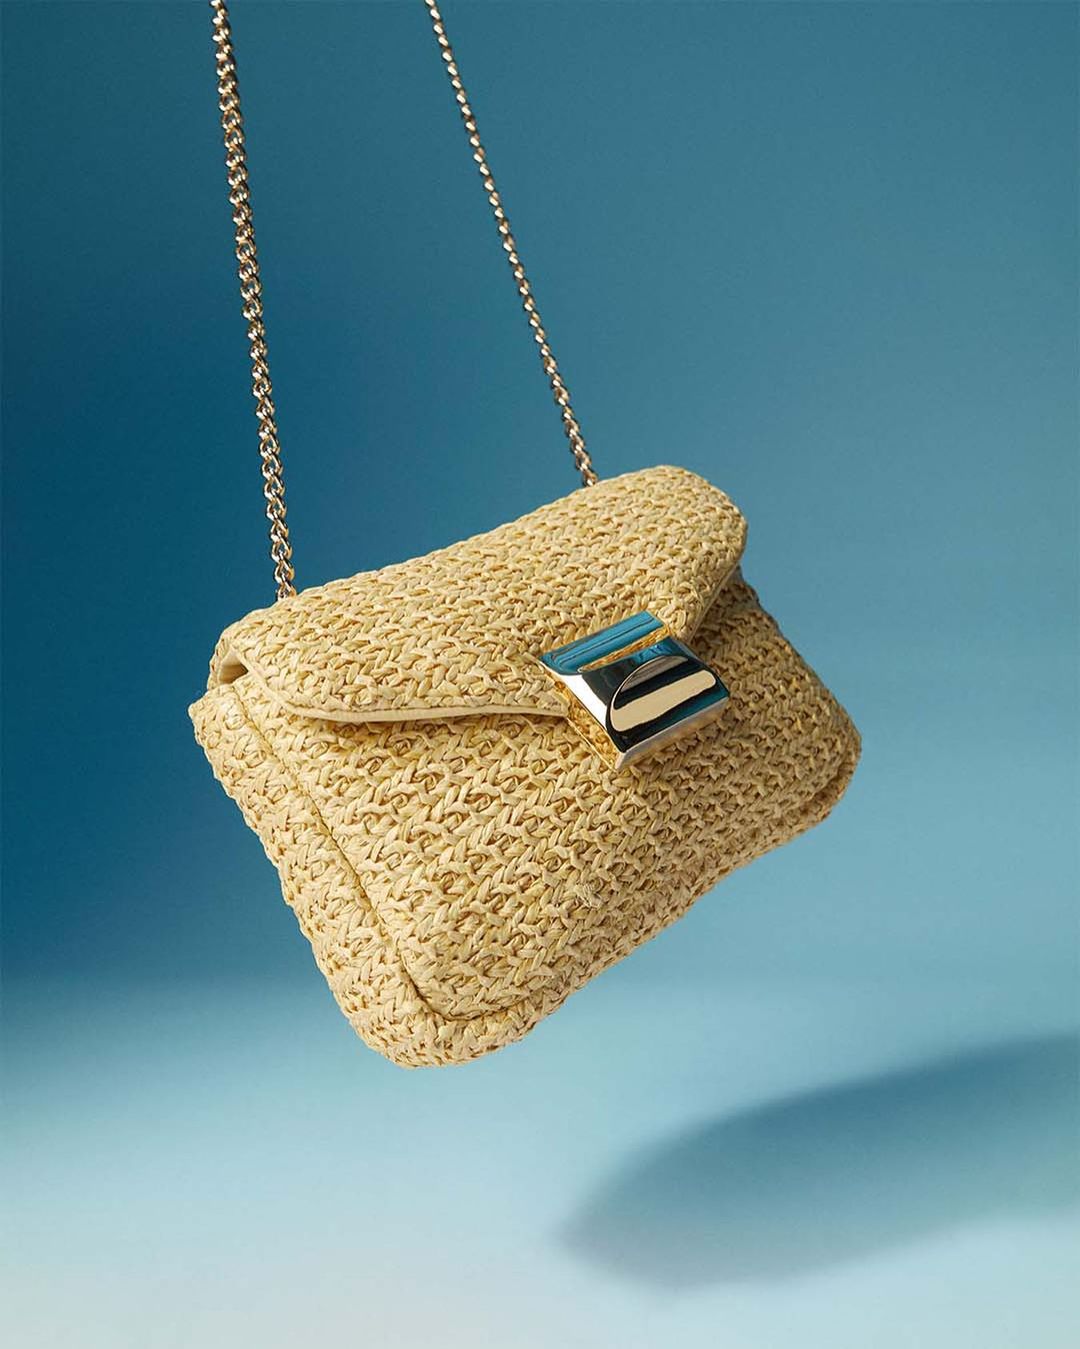 image of a straw handbag with a gold chain strap against a blue backdrop